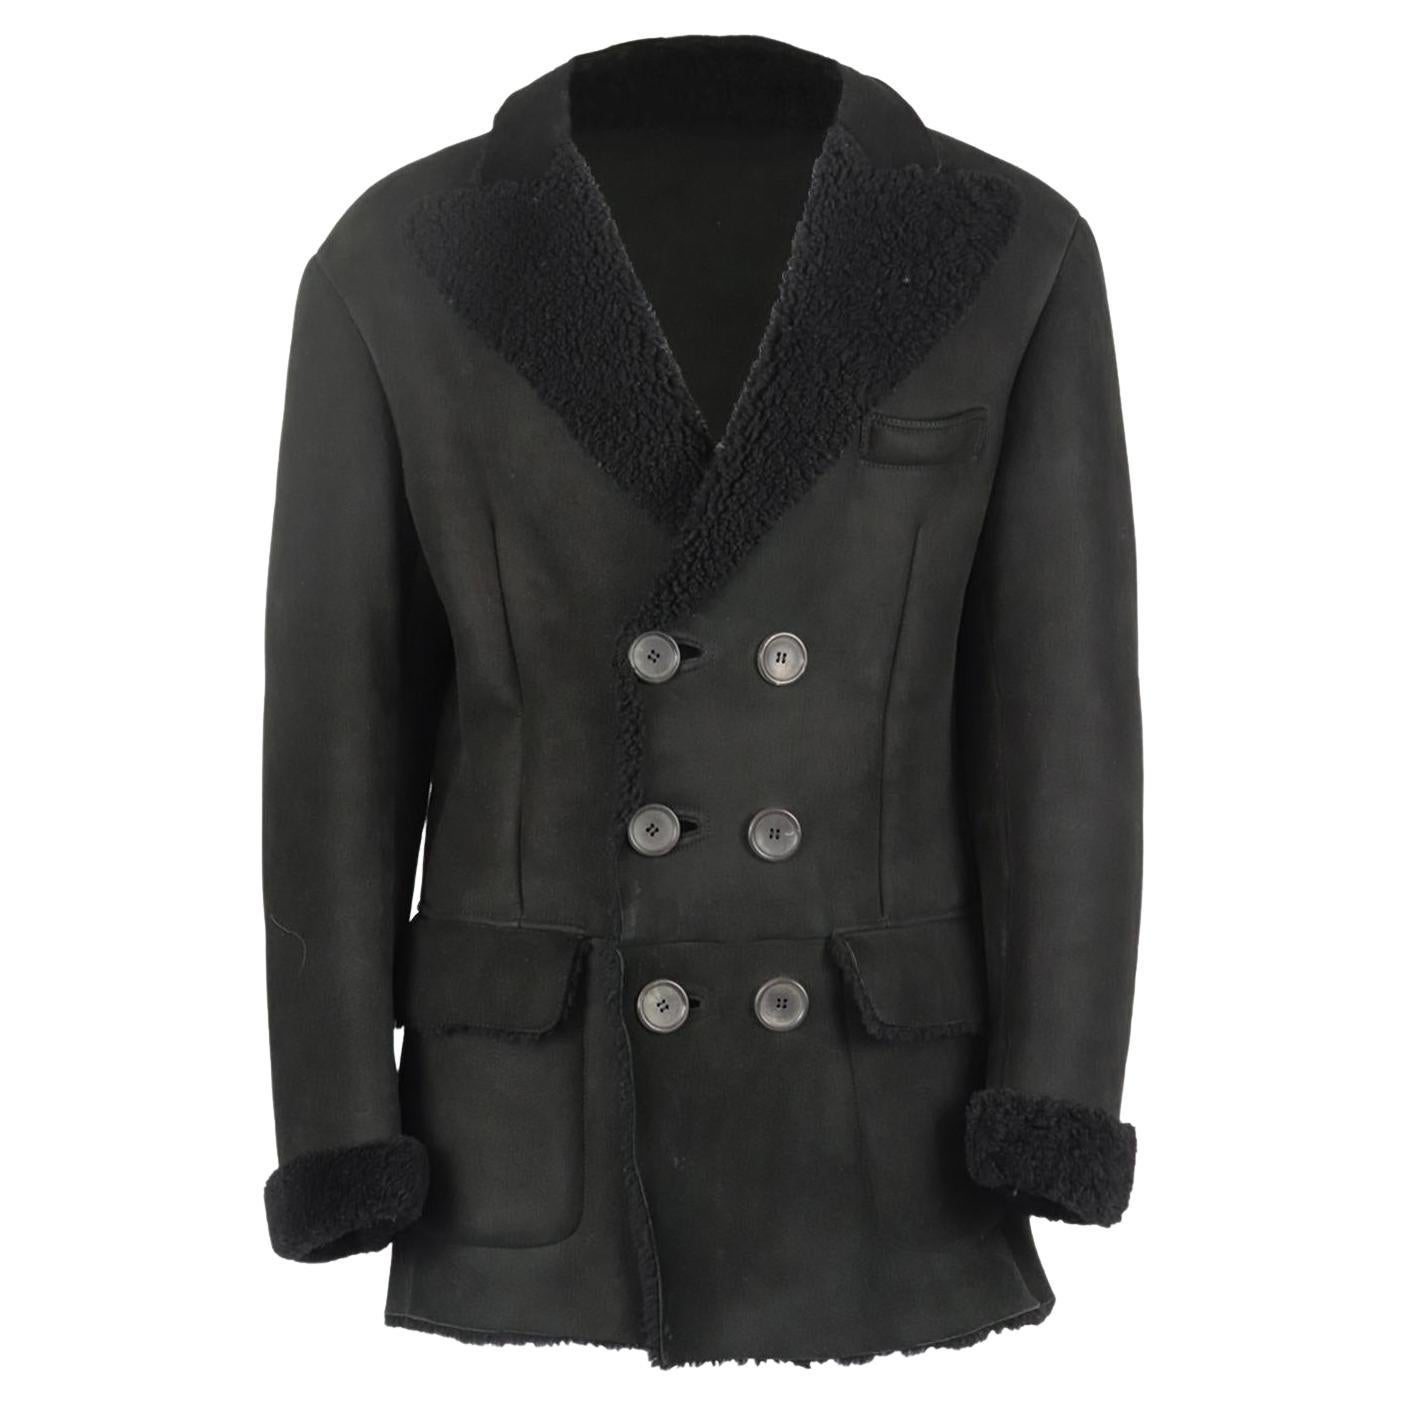 Gucci Men's Double Breasted Shearling Lined Suede Coat It 50 Uk/us 40